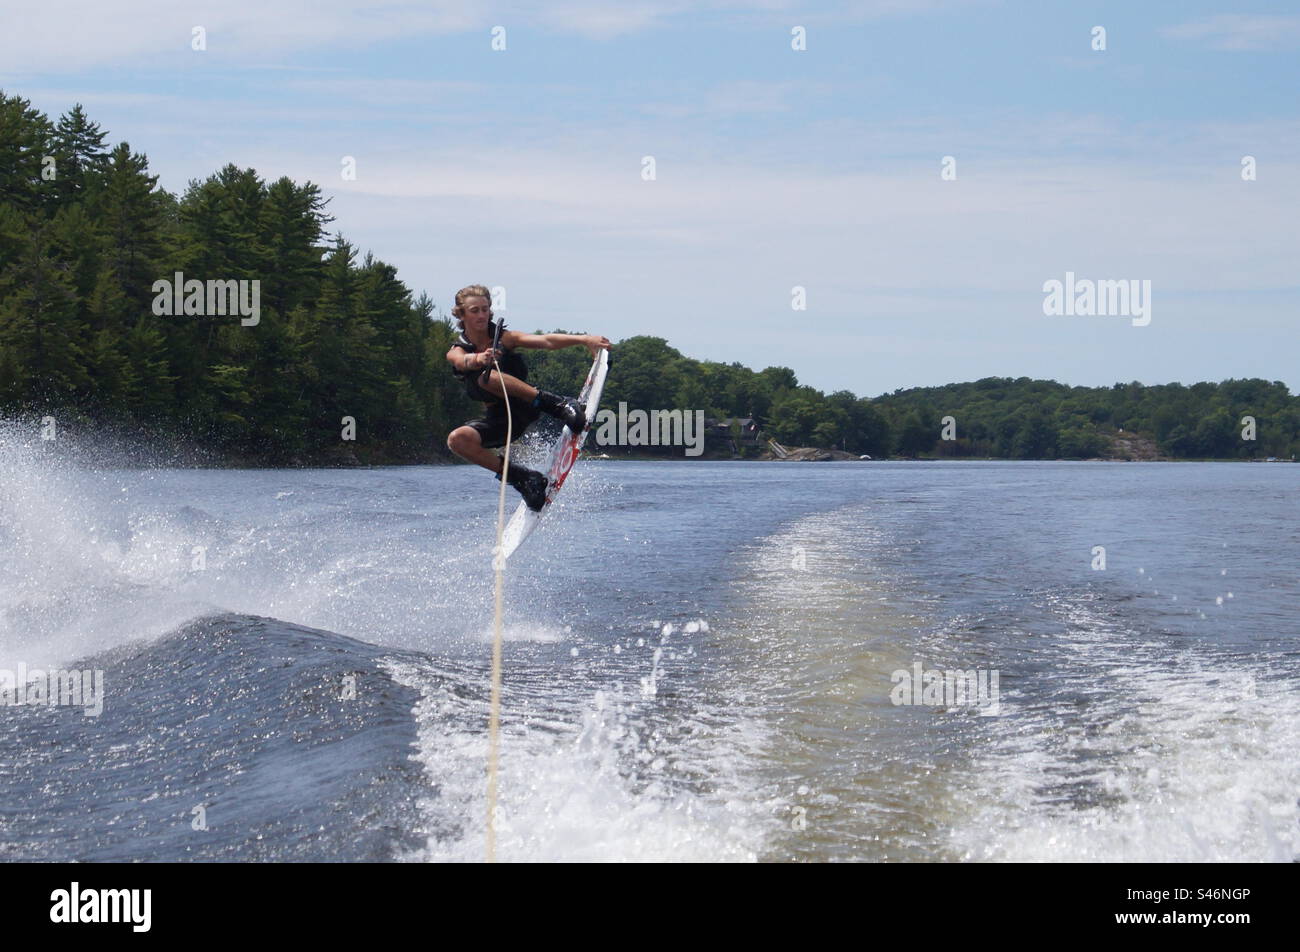 Wakeboarding in cottage country, jumping across the water Stock Photo